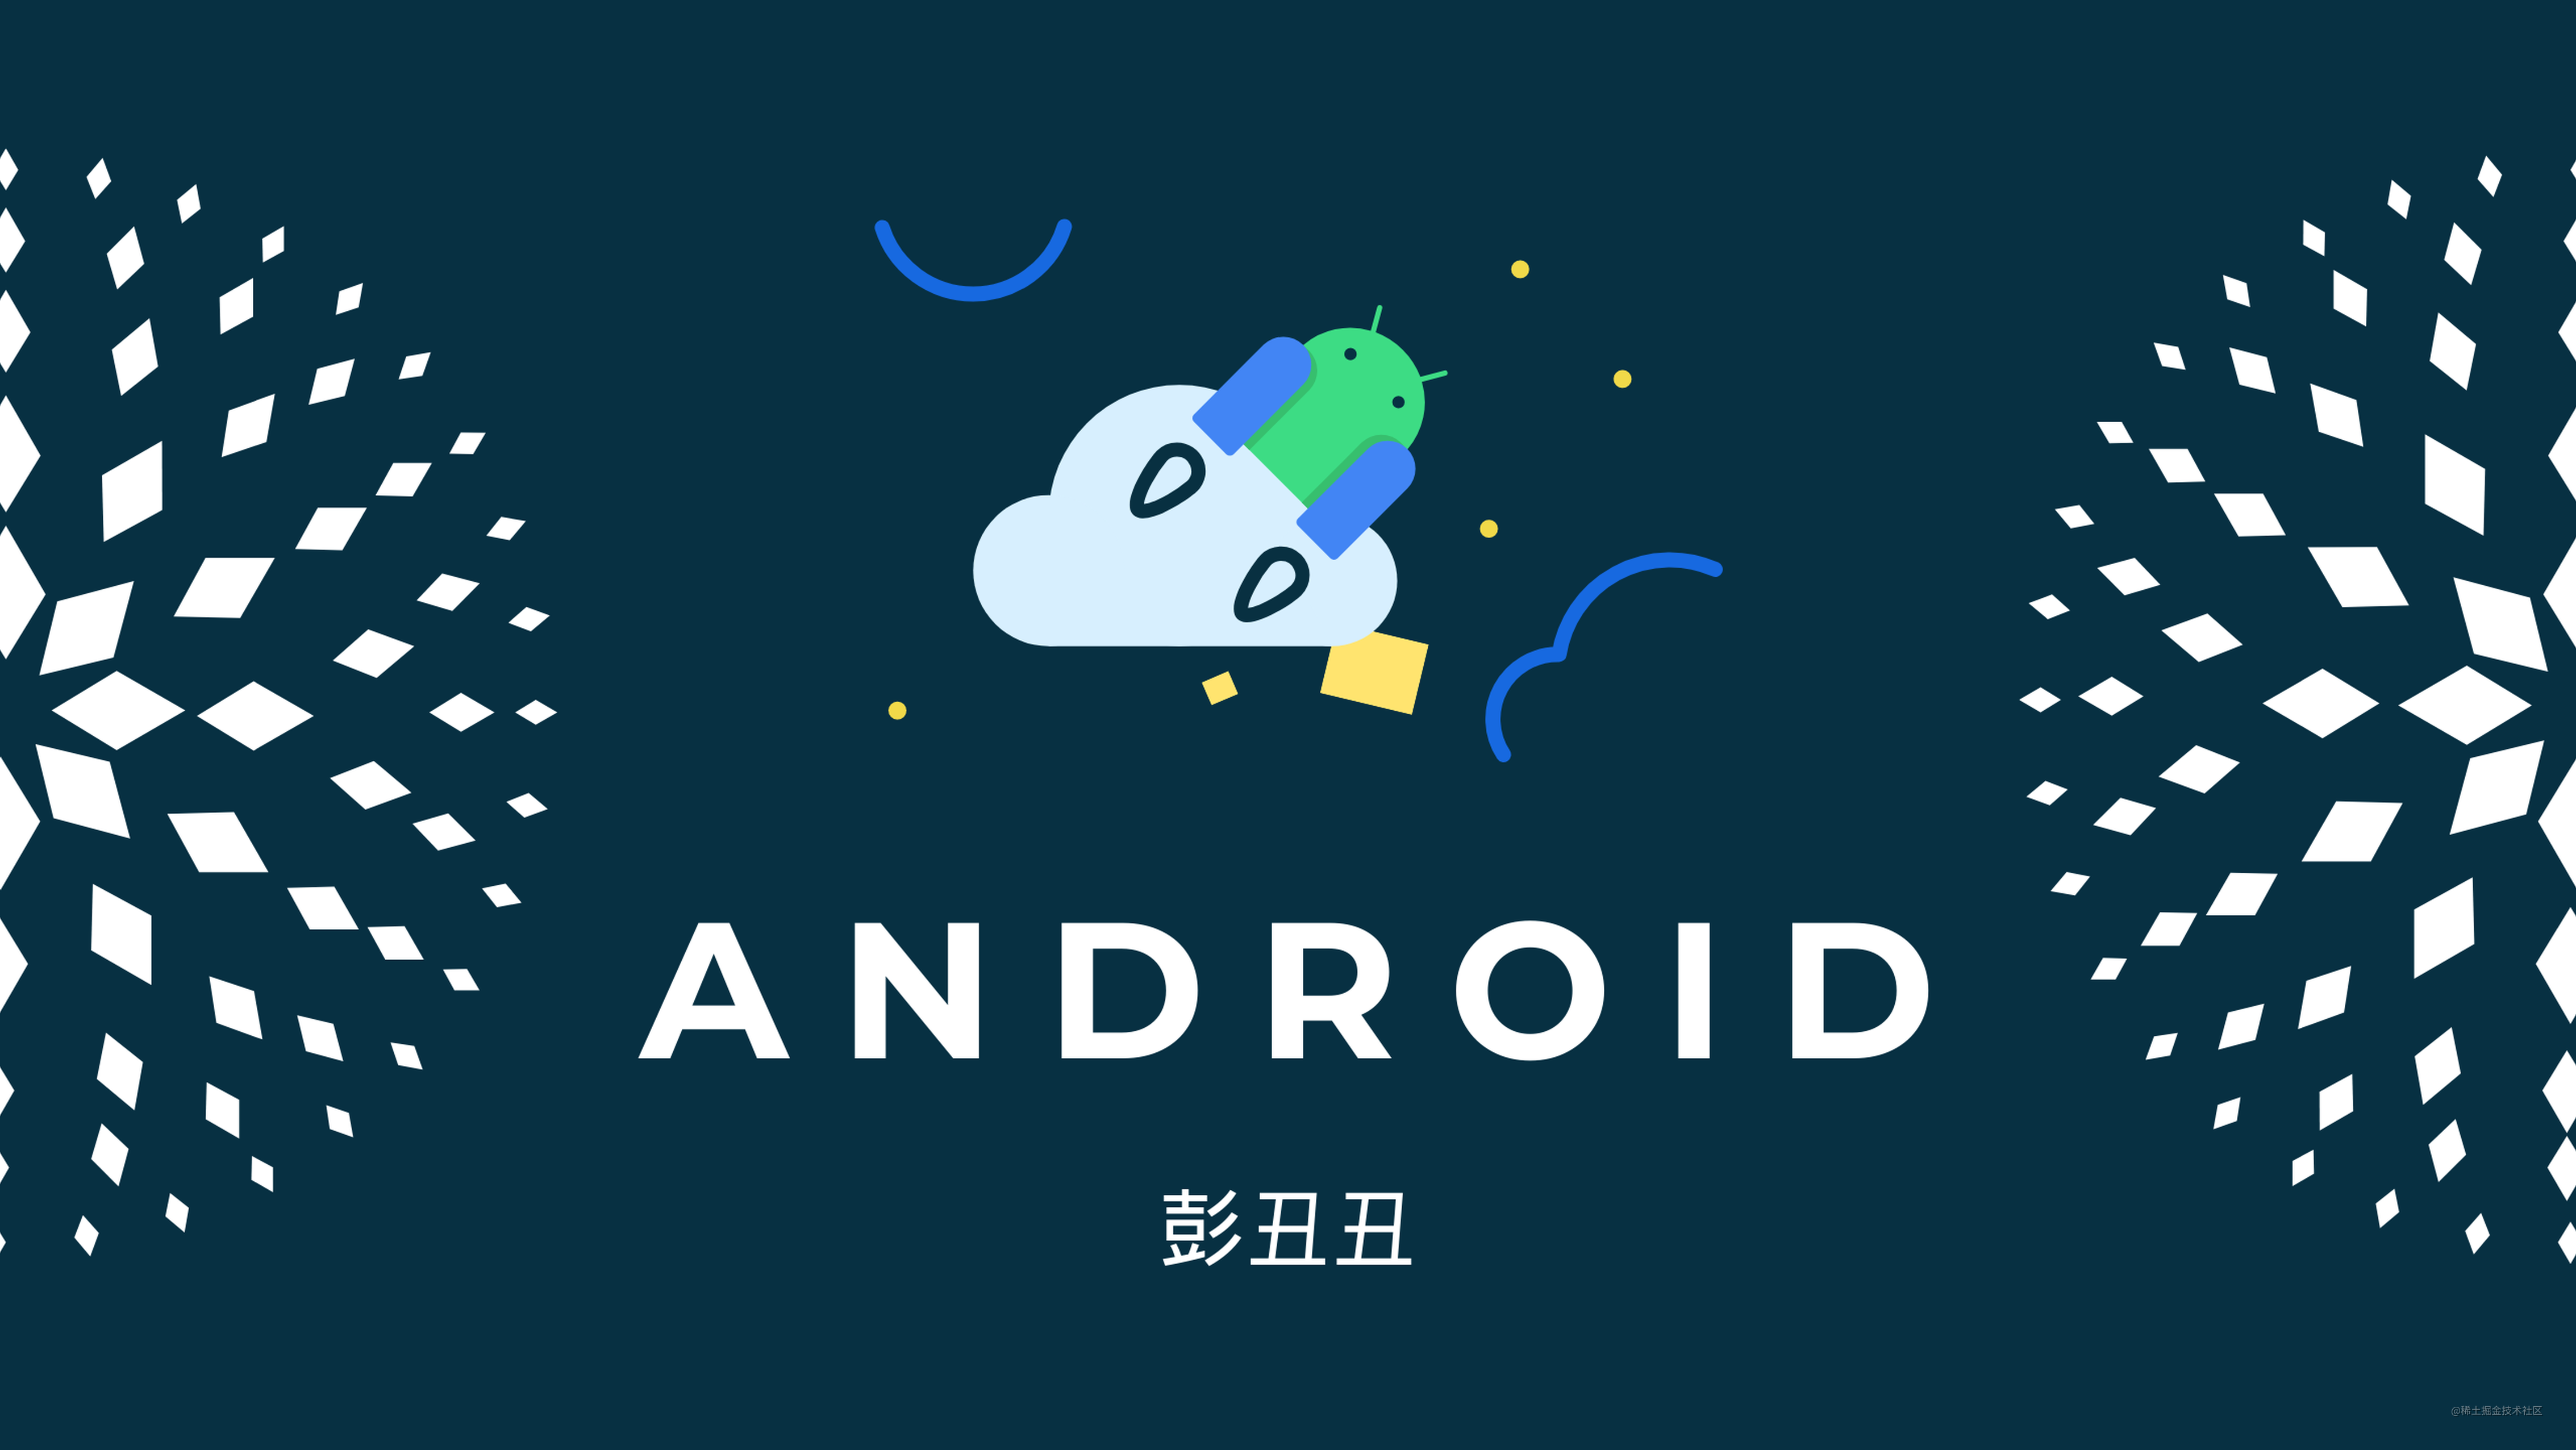 Android | 说说从 android:text 到 TextView 的过程（主题&样式）